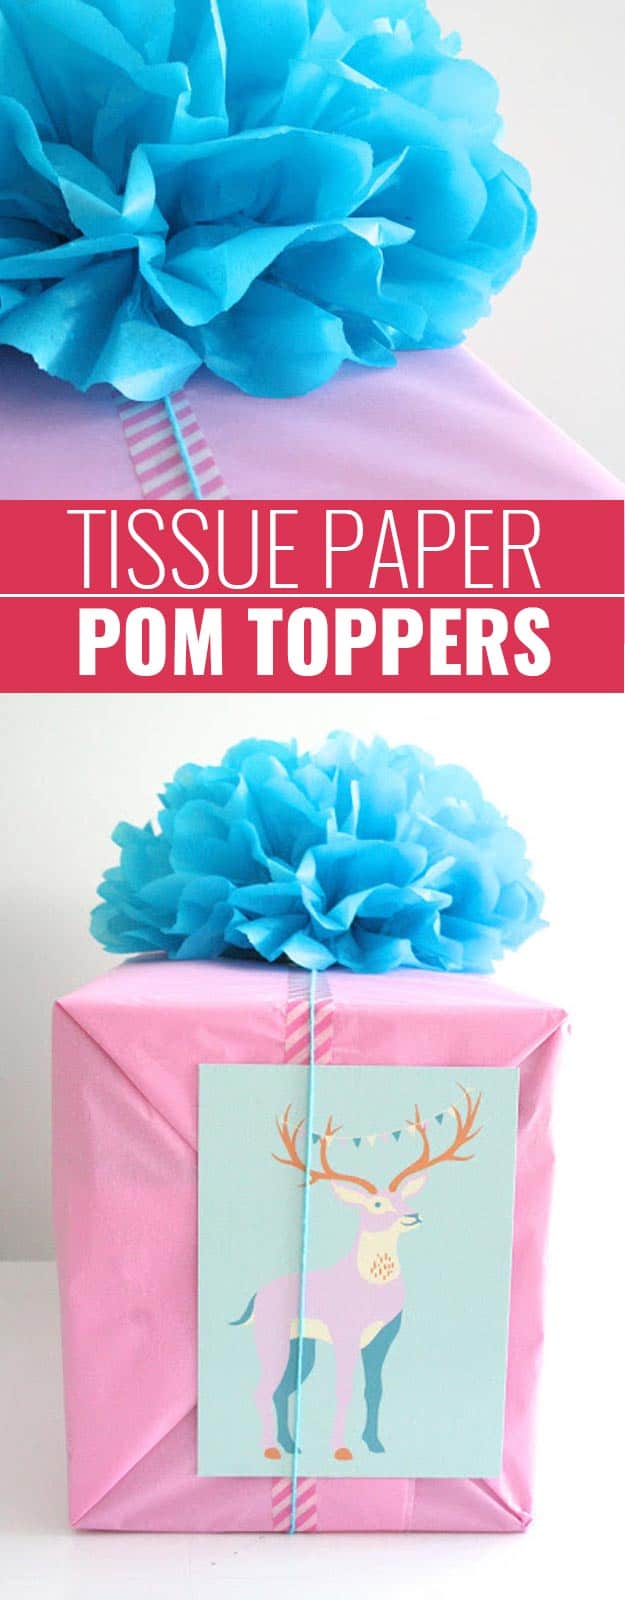 DIY Gift Wrapping Ideas - How To Wrap A Present - Tutorials, Cool Ideas and Instructions | Cute Gift Wrap Ideas for Christmas, Birthdays and Holidays | Tips for Bows and Creative Wrapping Papers | Tissue-Paper-Pom-Pom-Toppers #gifts #diys